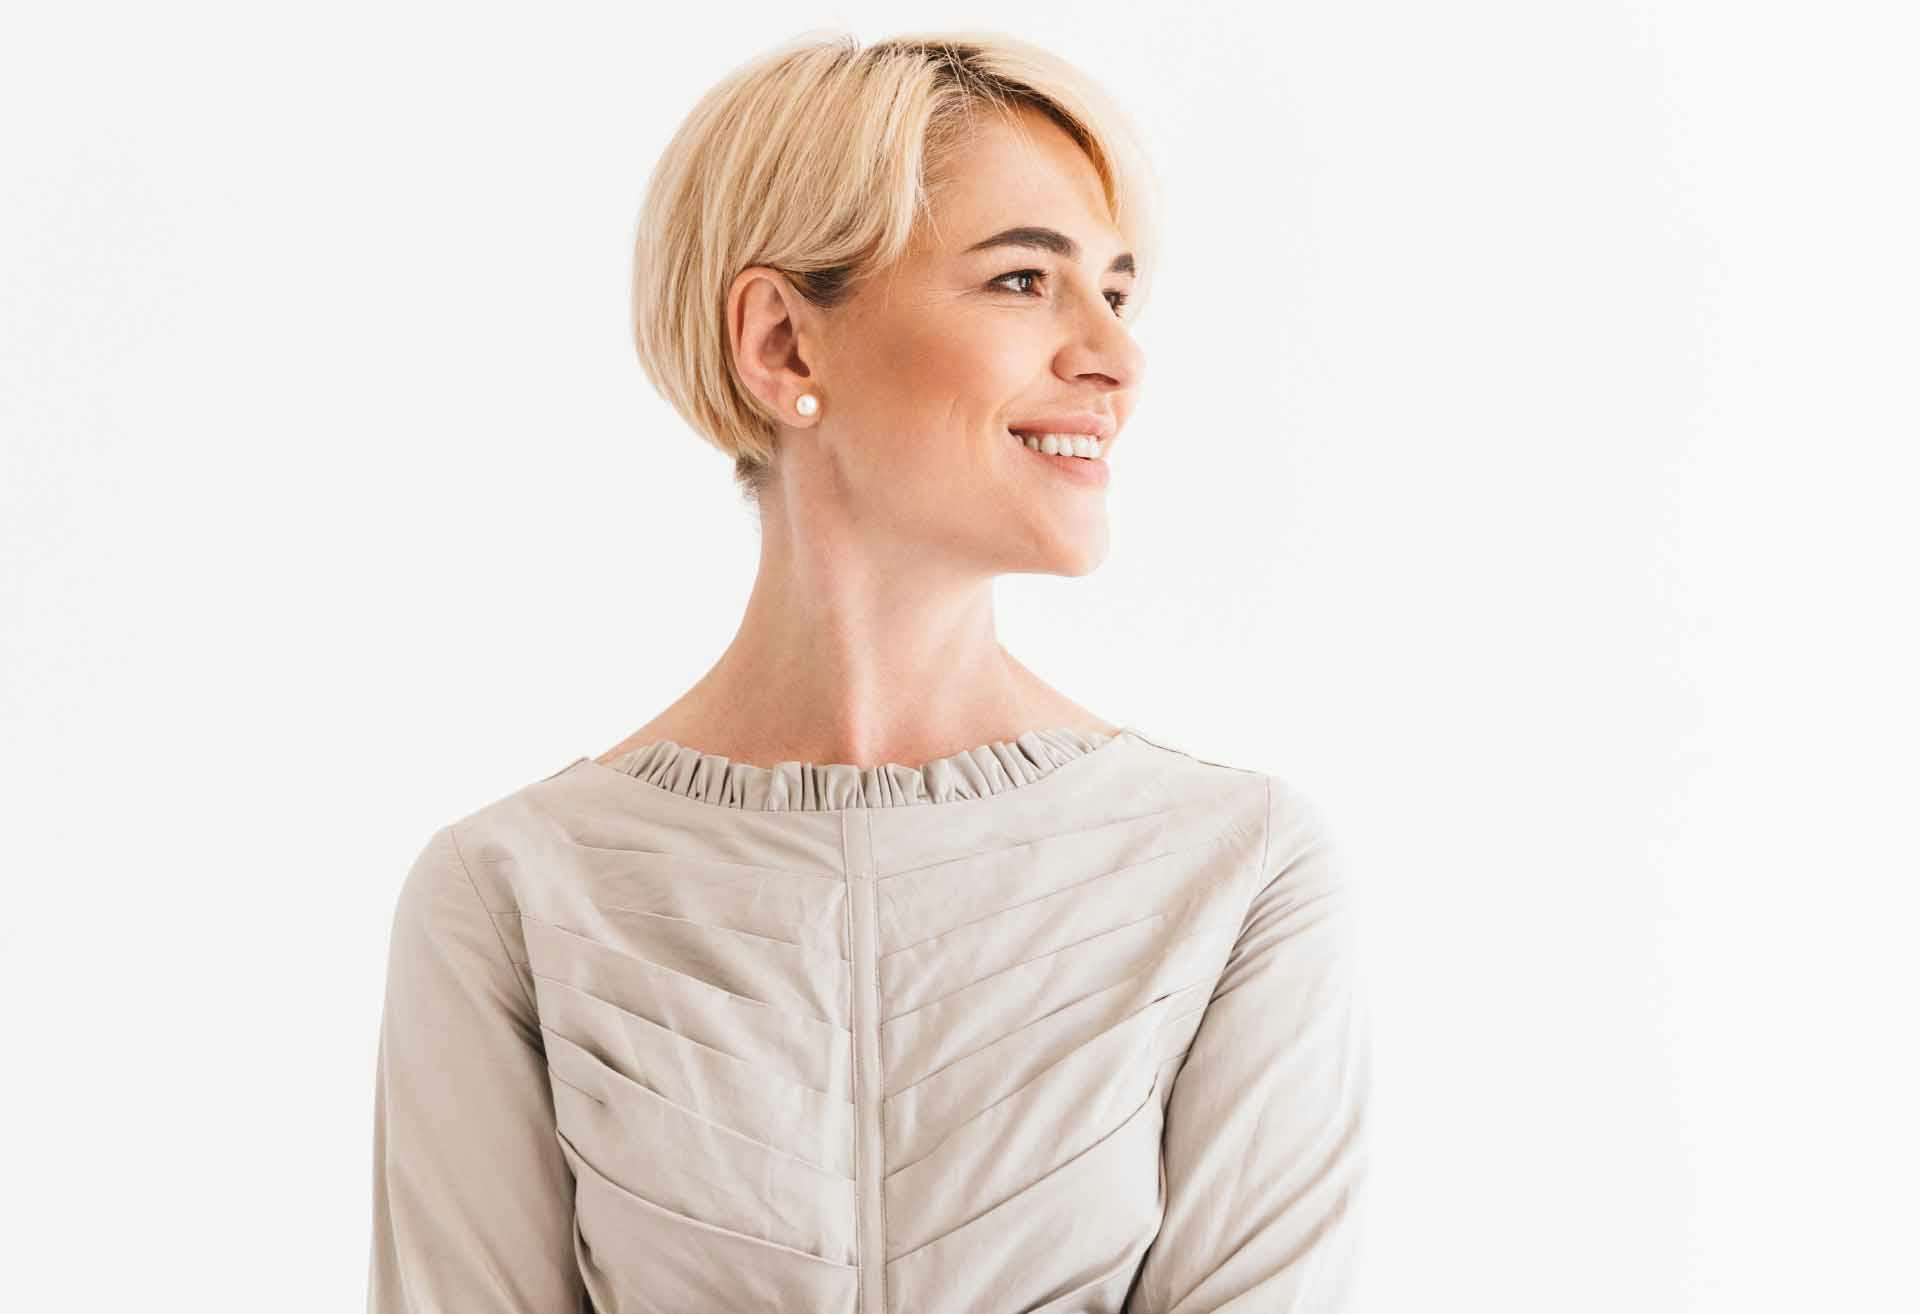 Woman with short blond hair looking to the side